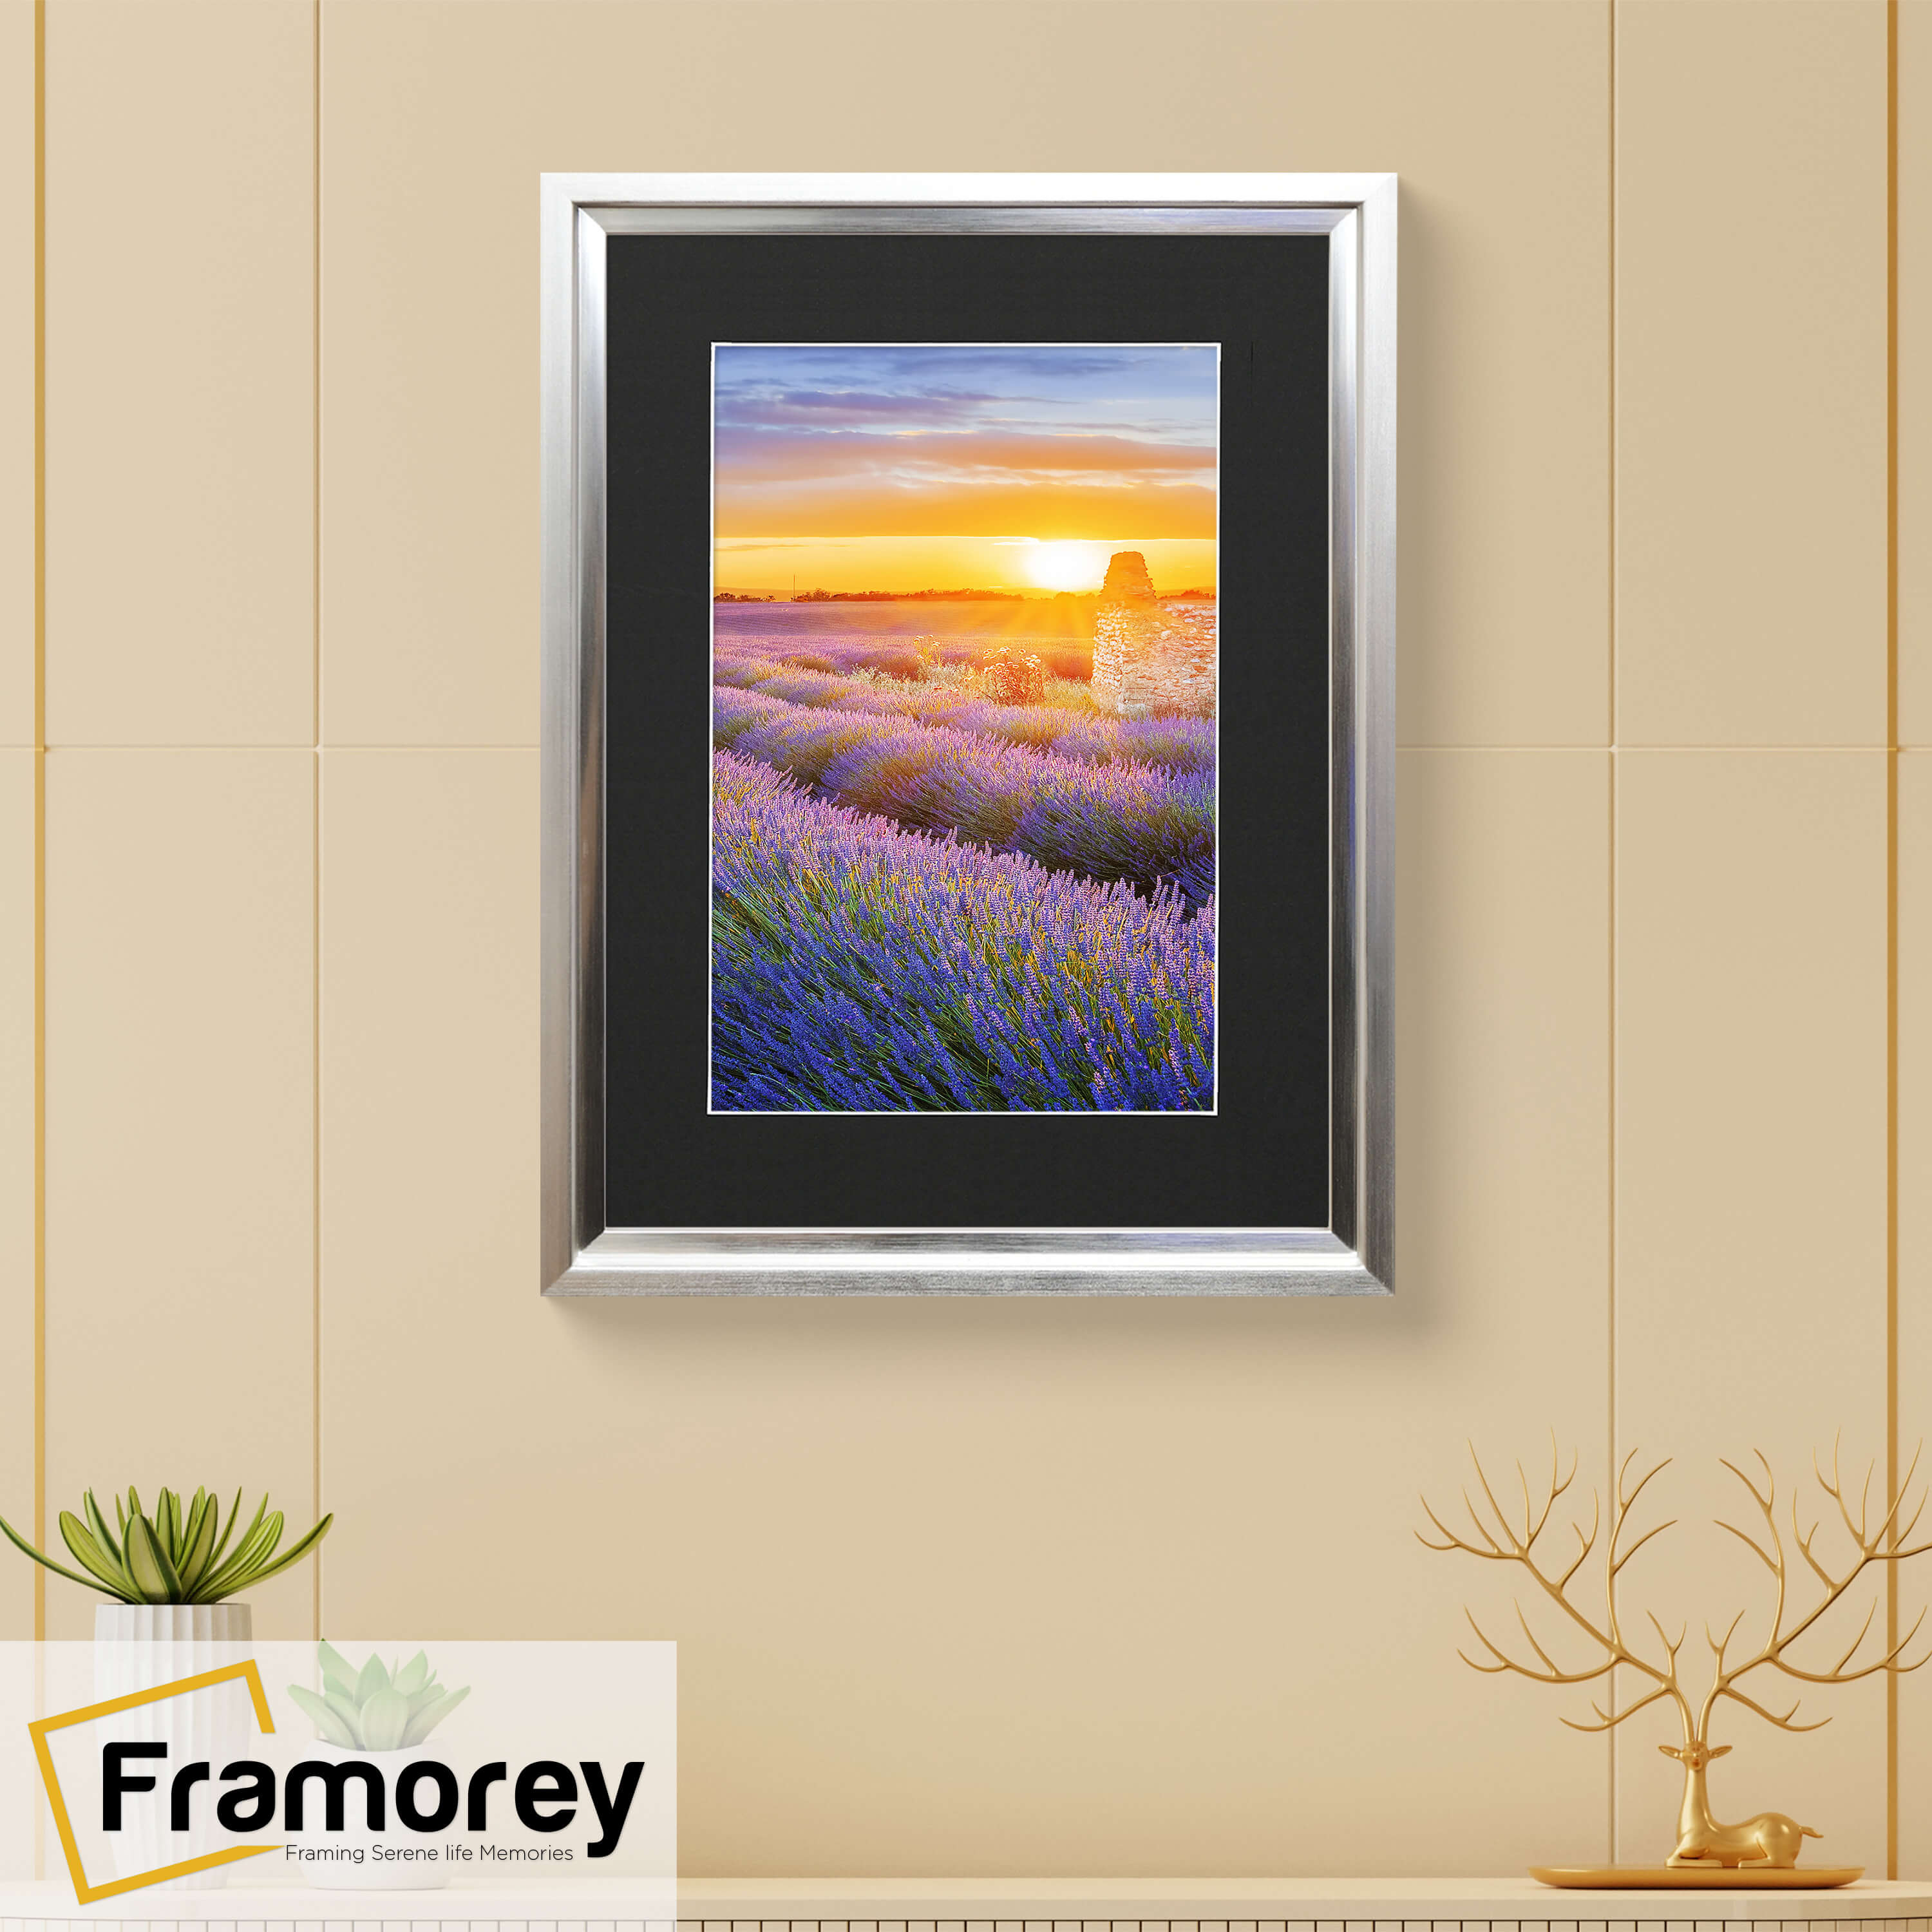 Silver Picture Frame Oslo Style Photo Frames With Black Mount